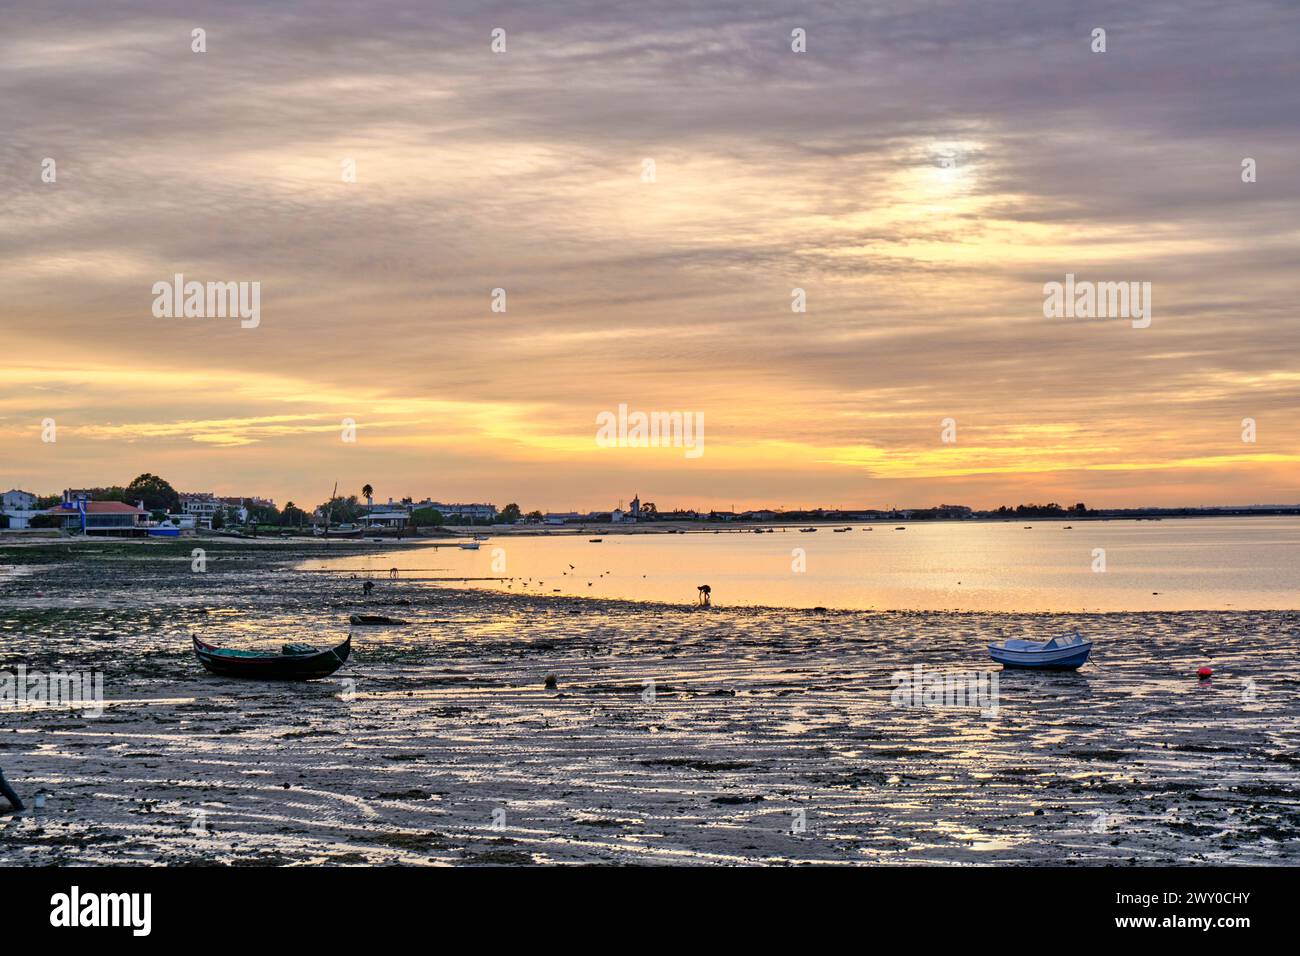 Tagus river at low tide. Alcochete, Portugal Stock Photo